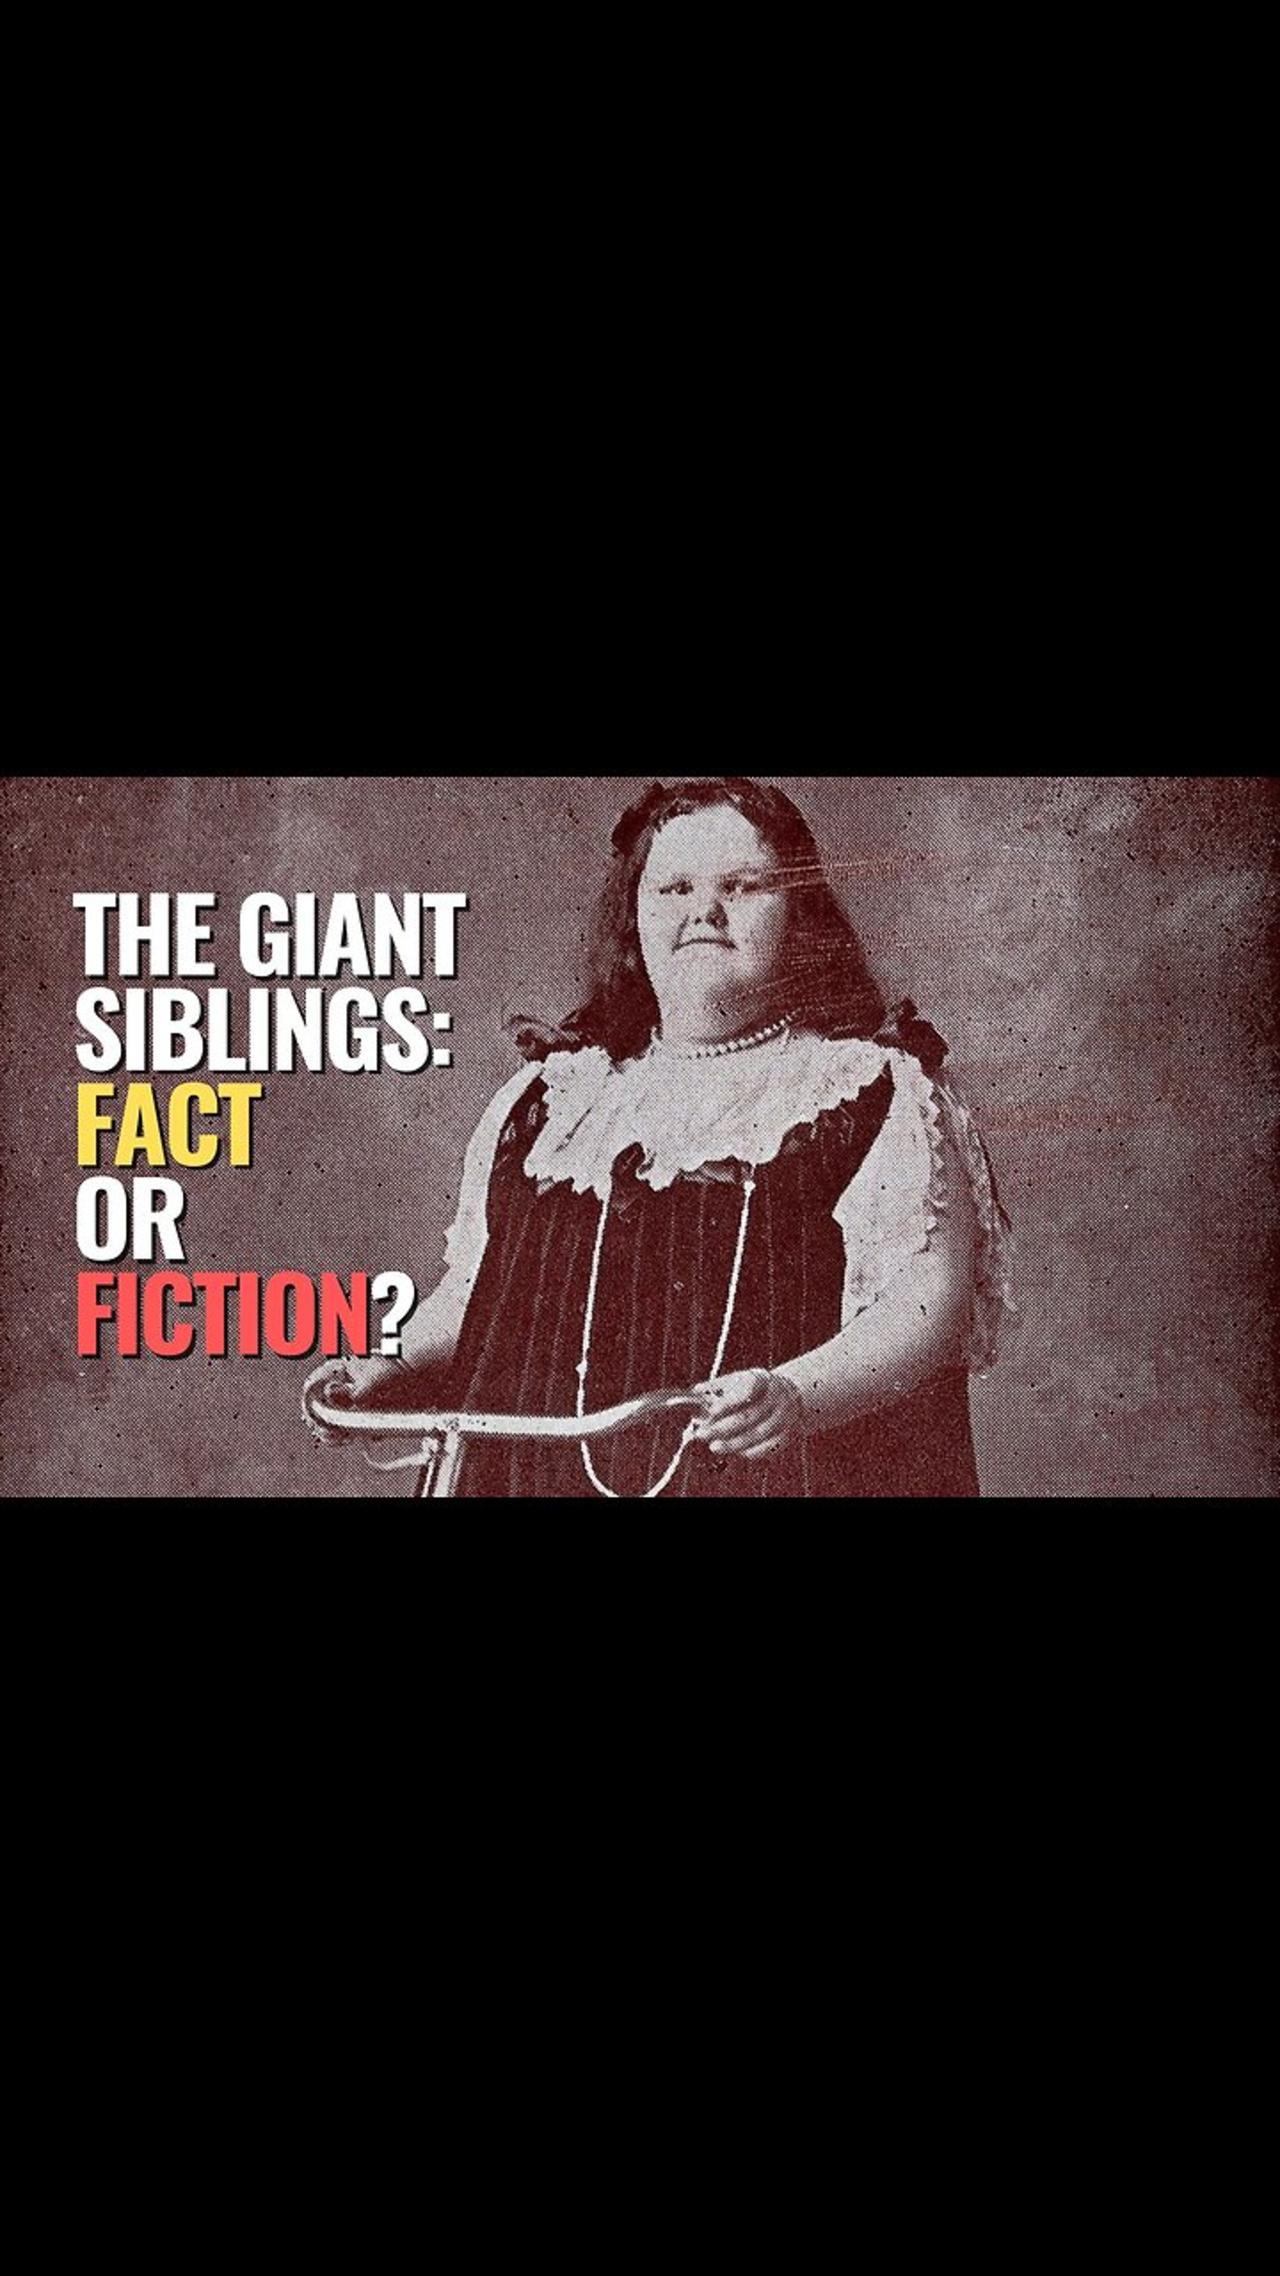 The Giant Siblings: Fact or Fiction?